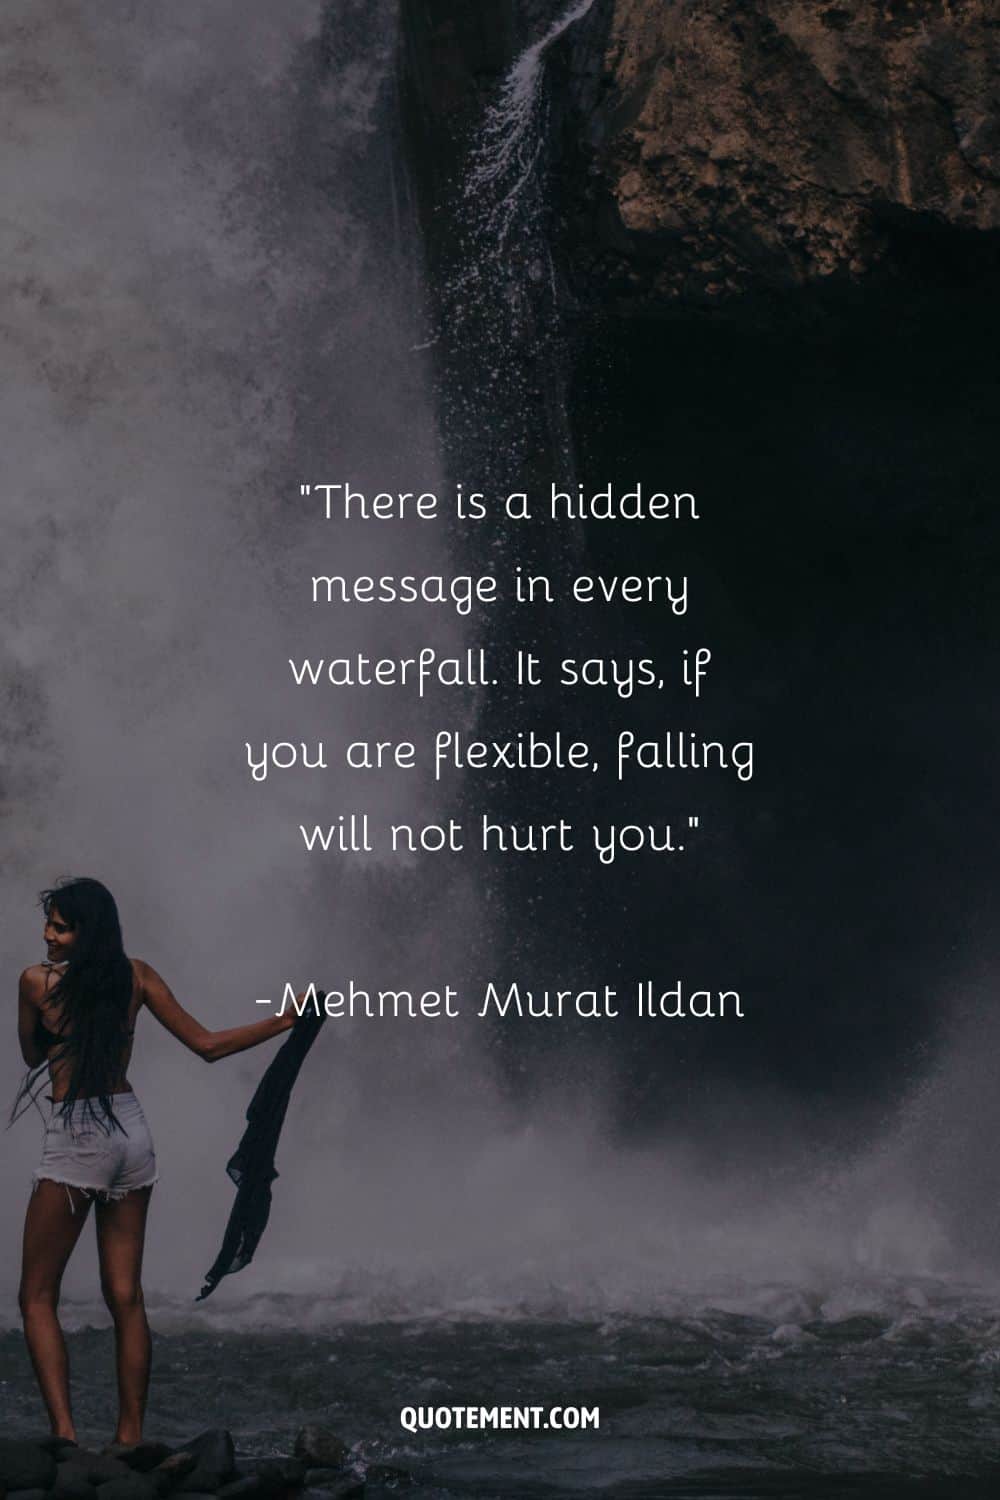 Waterfall quote by Mehmet Murat Ildan and a woman by the waterfall in the background
